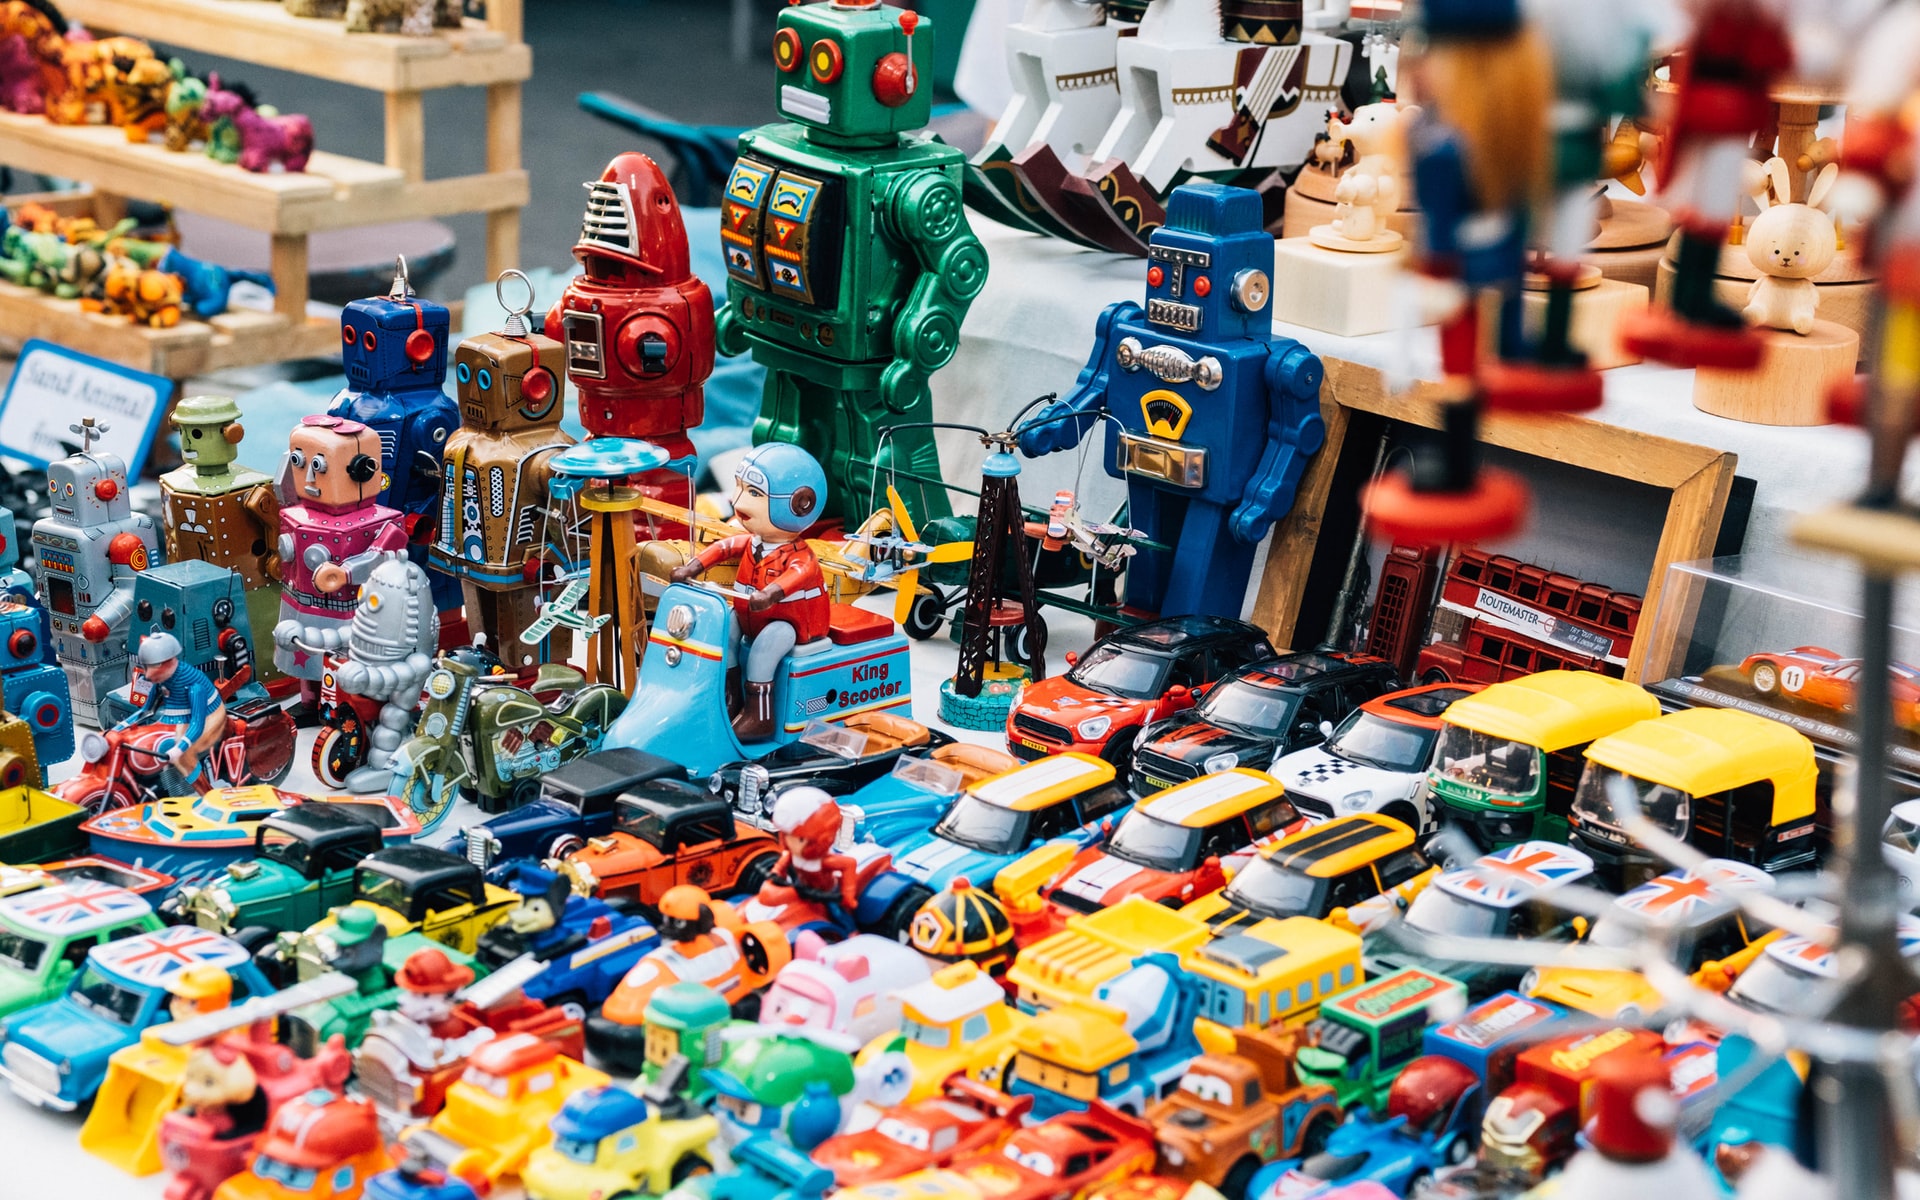 How to manage the toy clutter